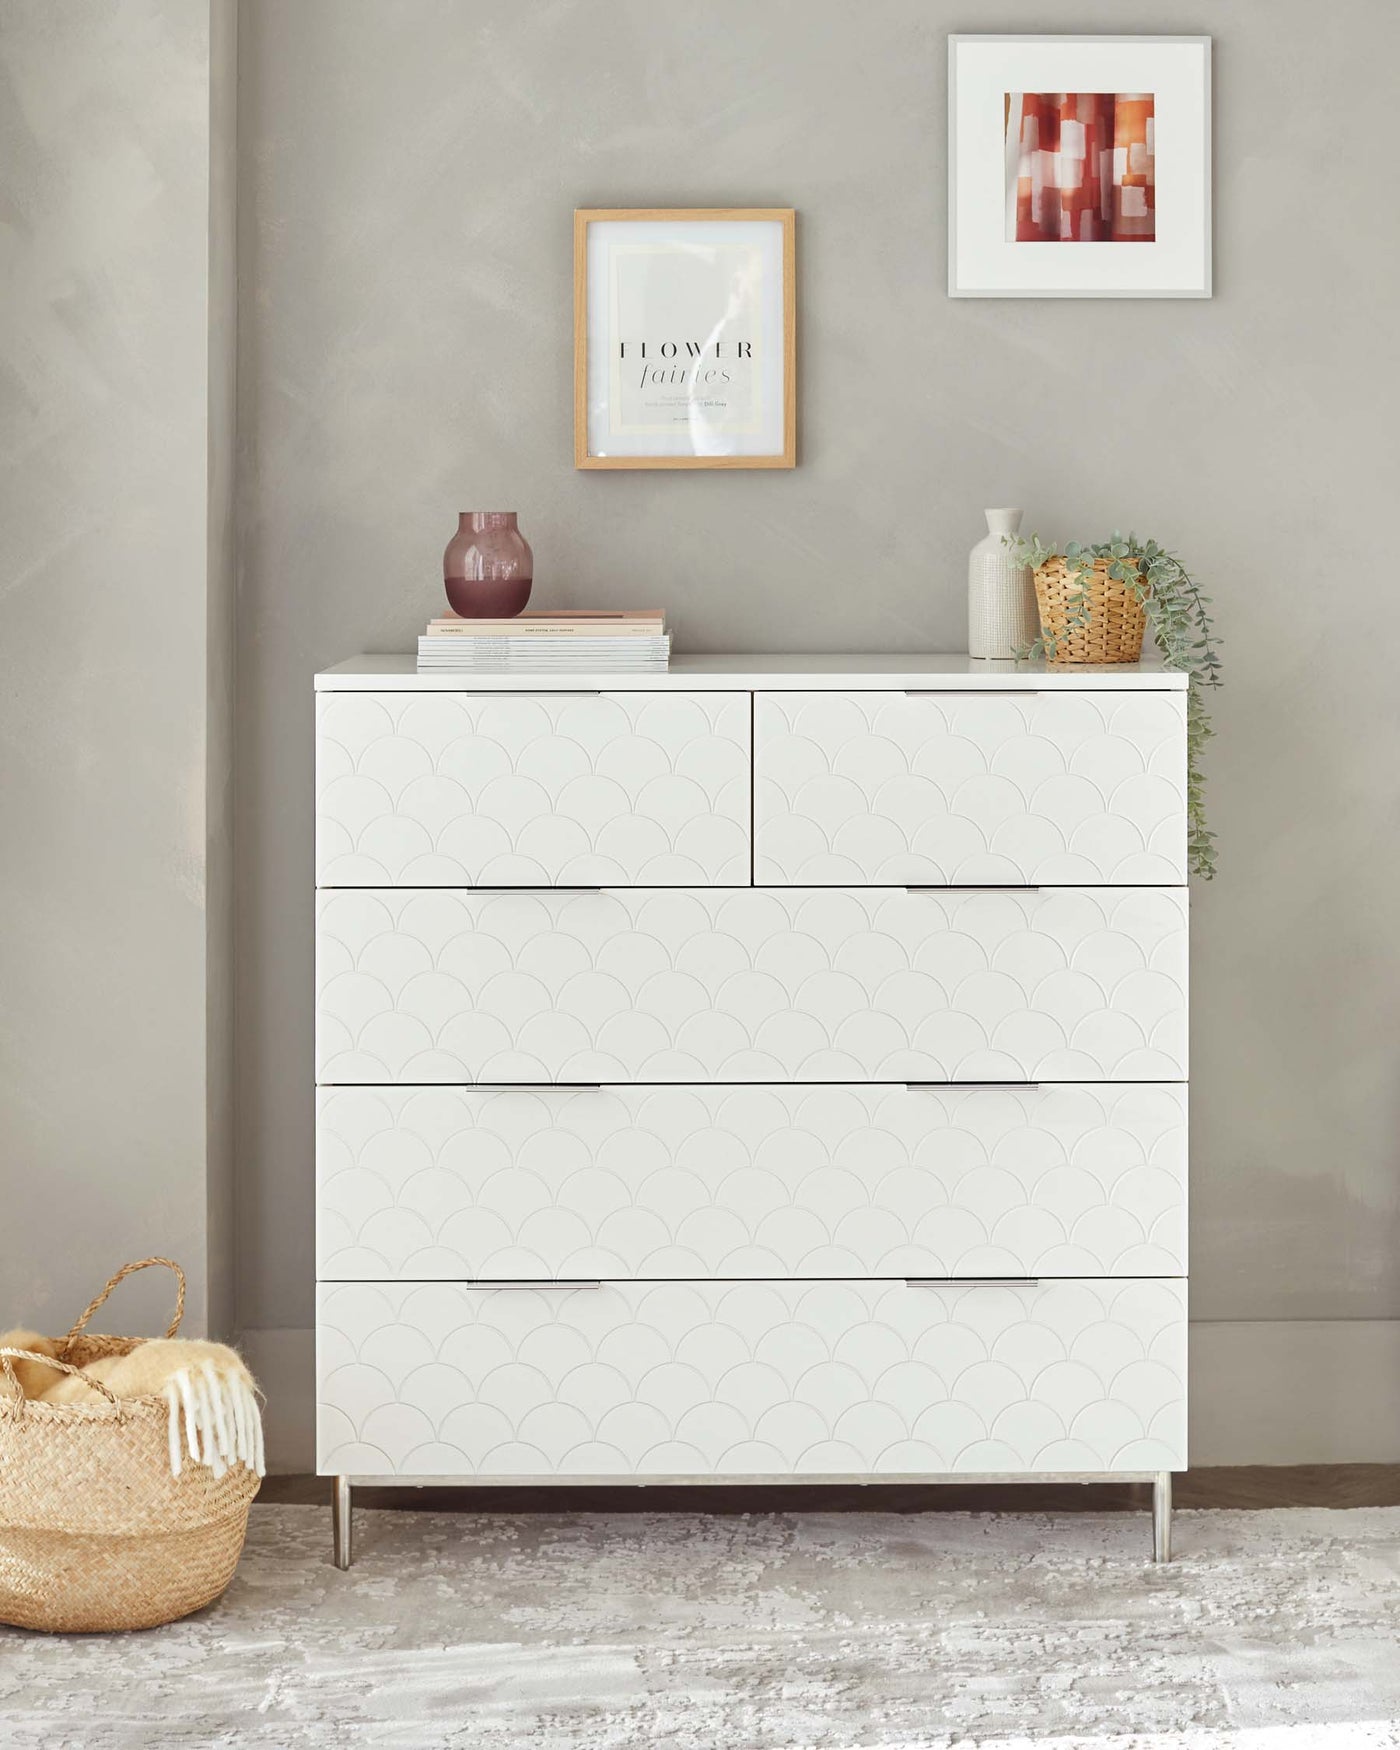 Modern white six-drawer dresser with a scalloped pattern facade and minimalistic metal handles, set against a grey wall with decorative items on top and a woven basket beside it.